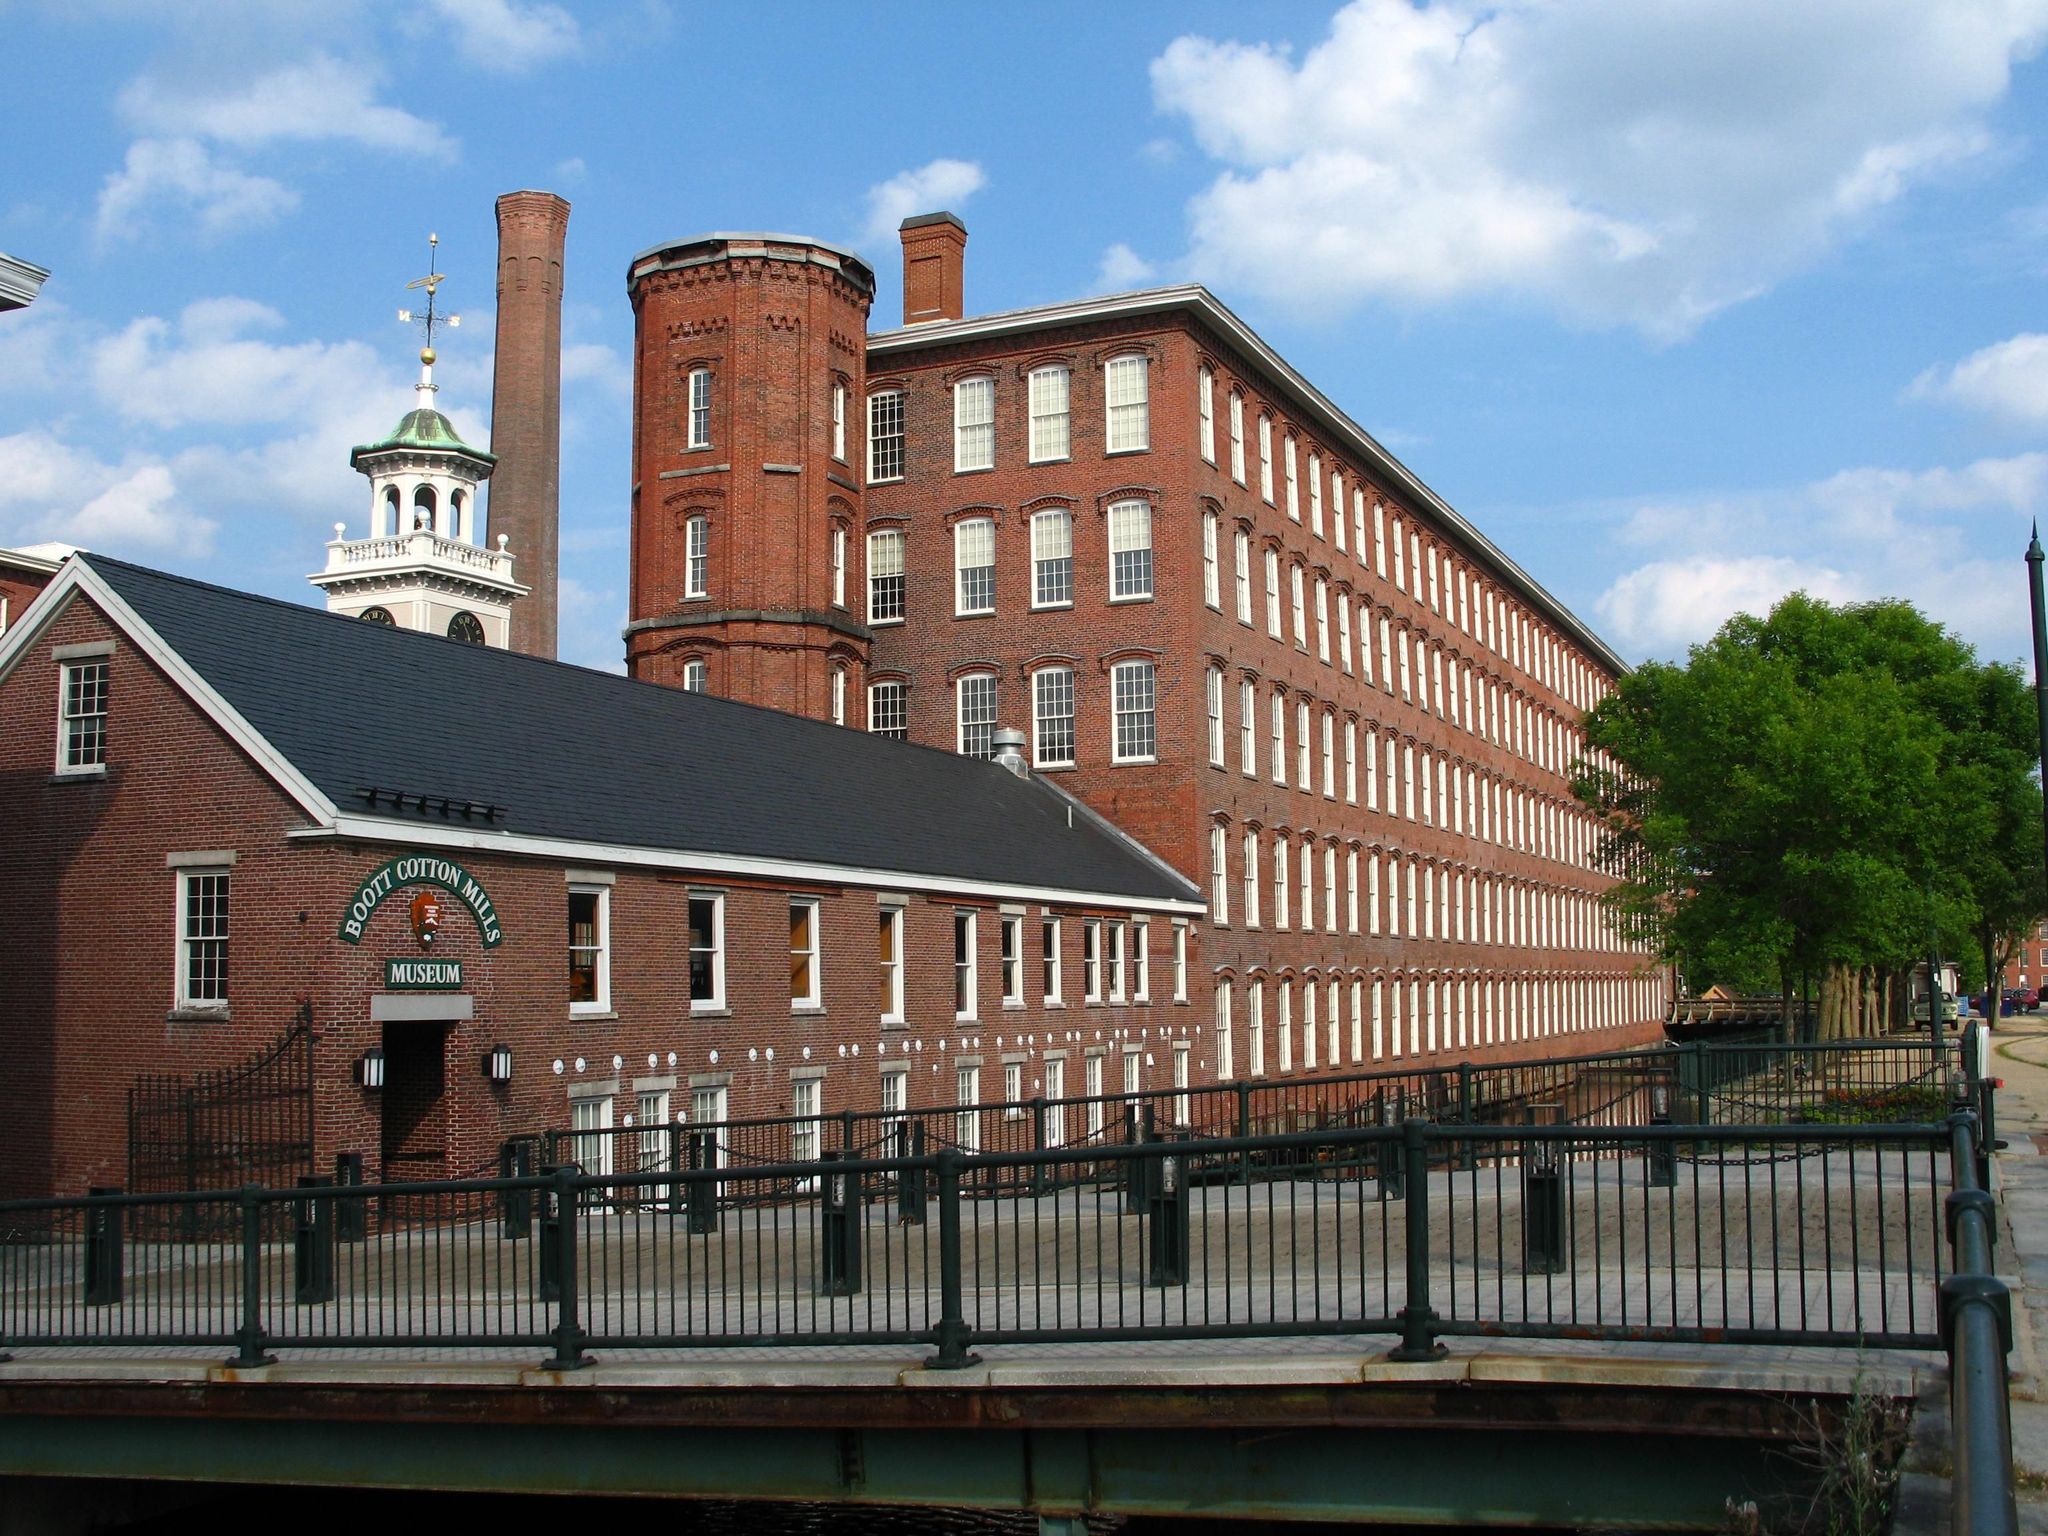 The Boott Cotton Mills is one of the best, most-intact complexes of cotton mills from Lowell's heyday in the 19th century.